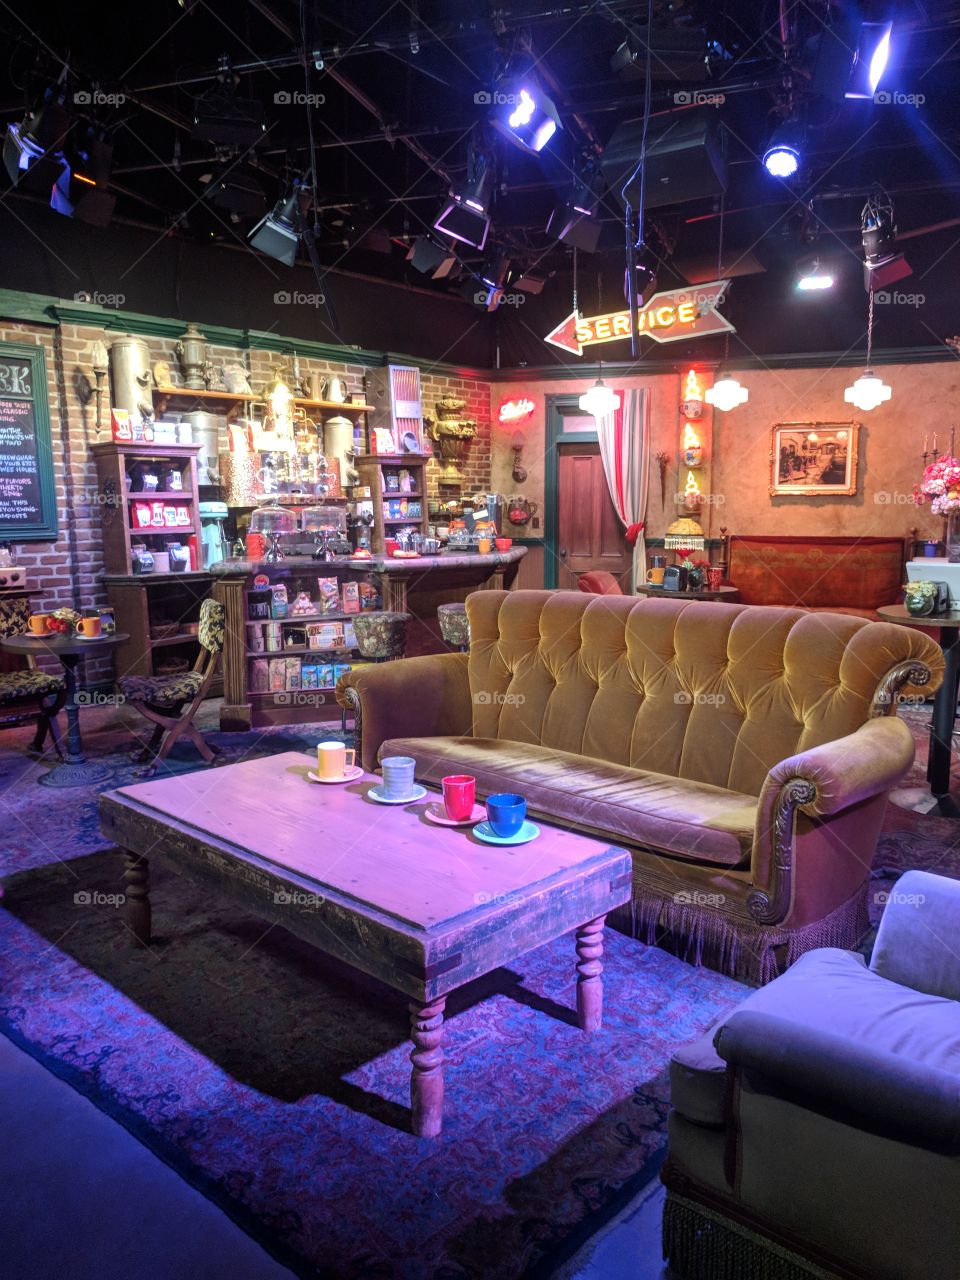 Central Perk sofa from Friends